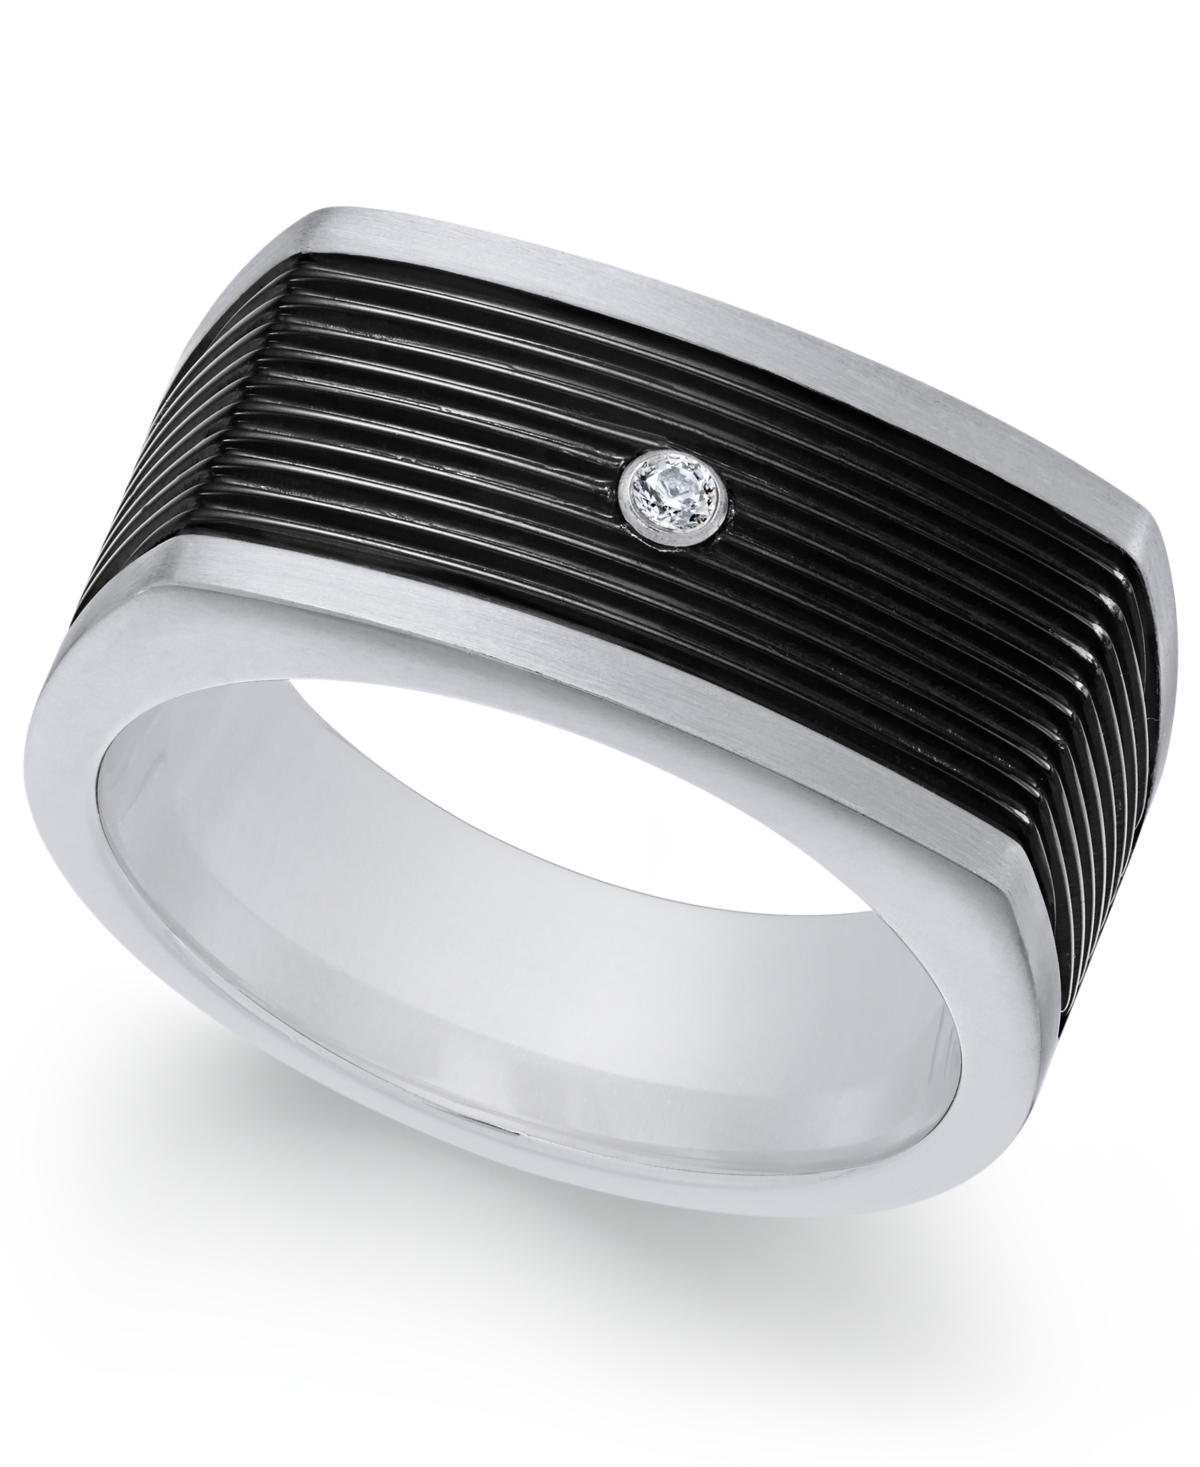 Men's Two-Tone Cubic Zirconia Ring - Silver